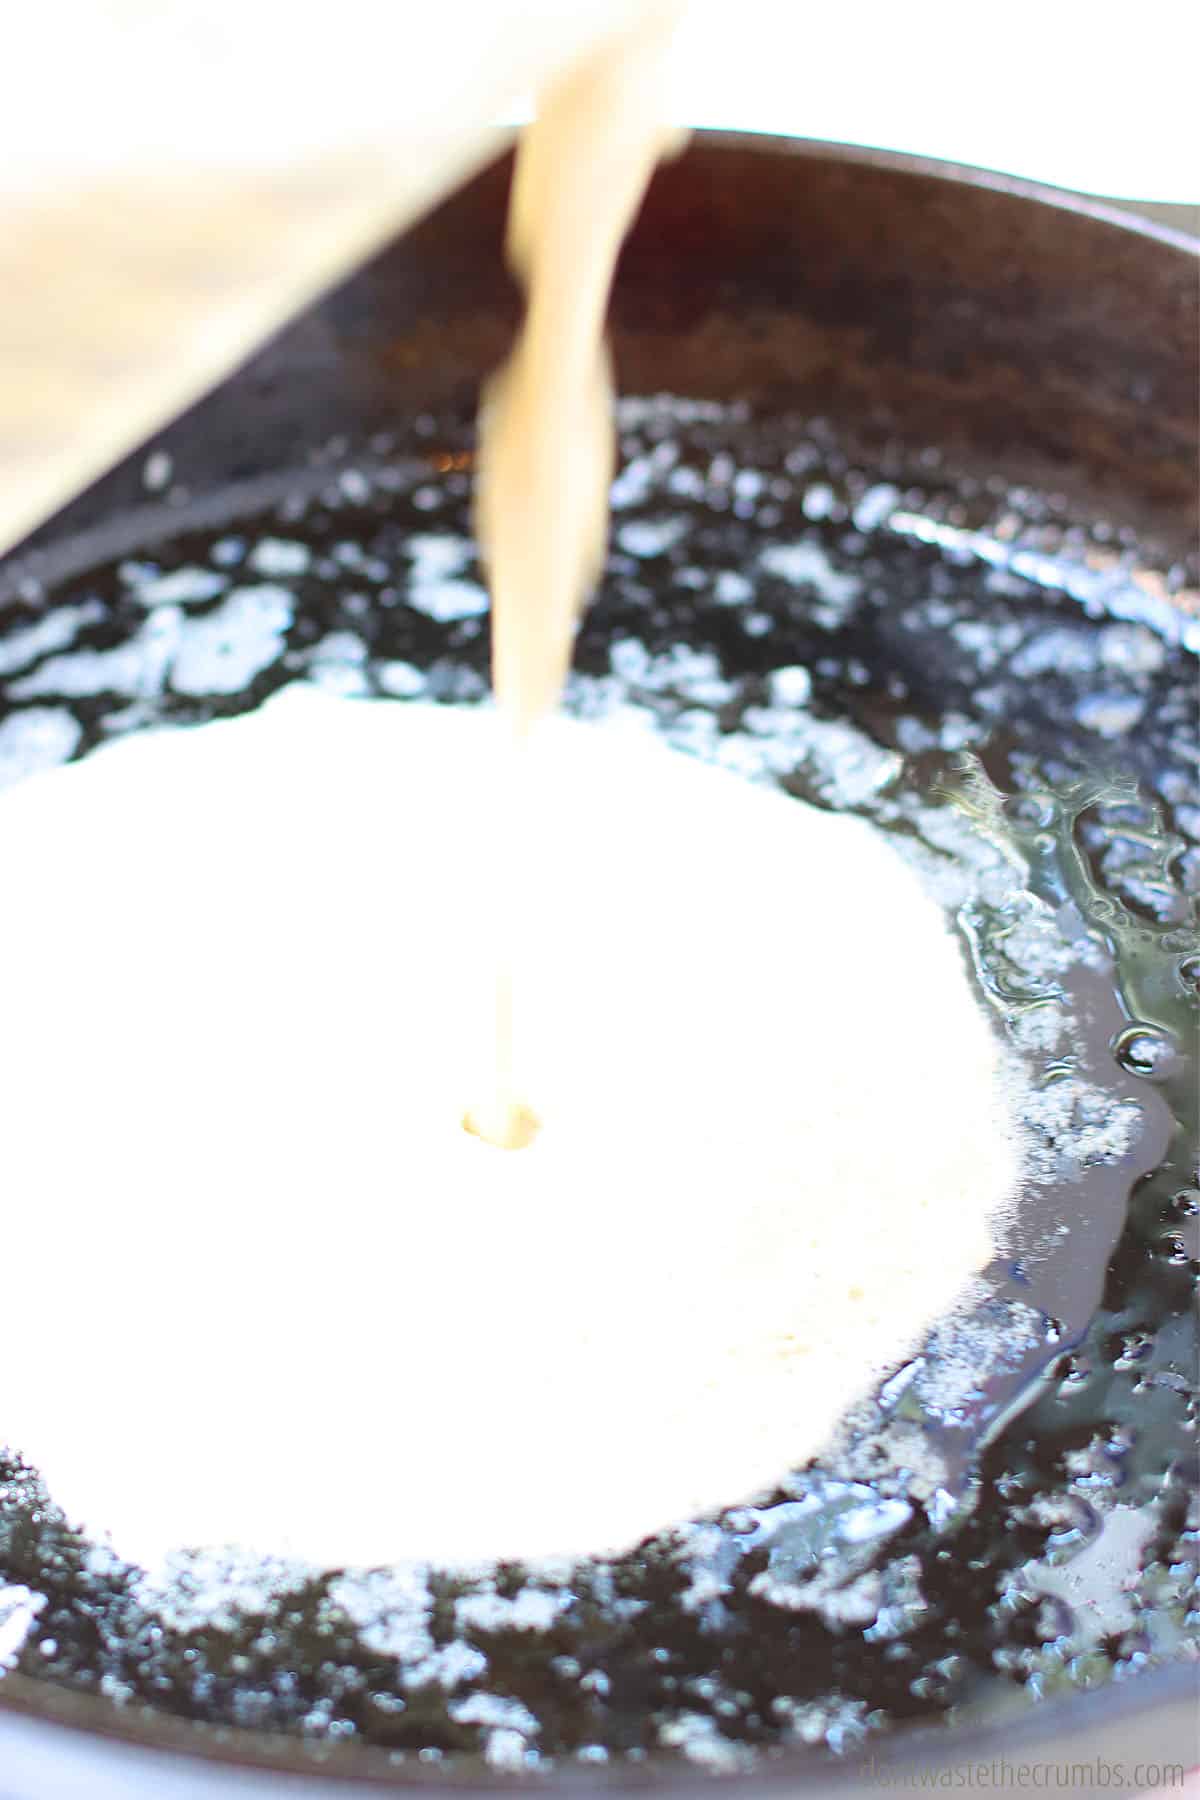 Pouring cornbread batter into the hot, greased cast iron skillet